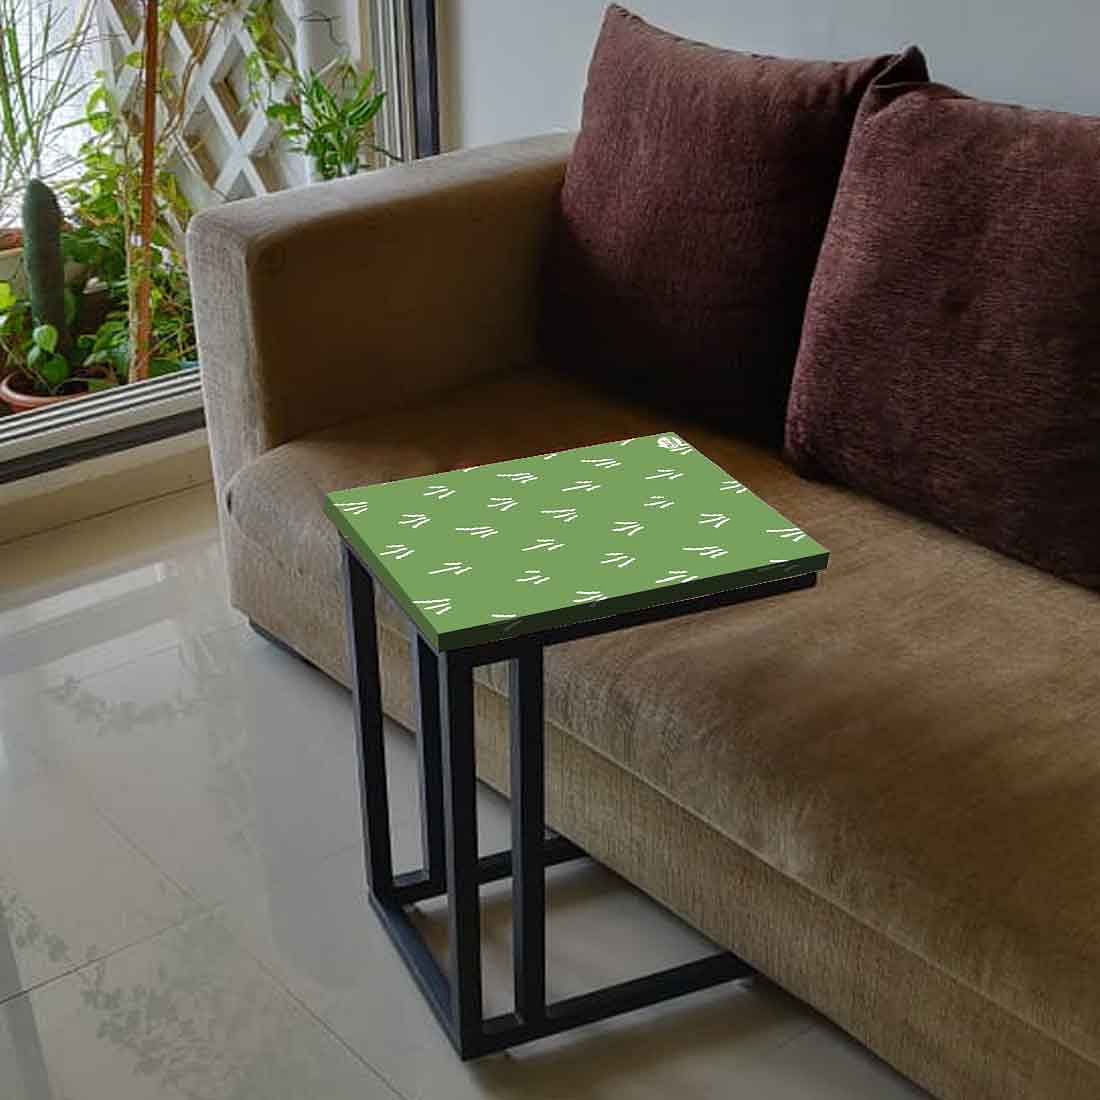 Best Metal C Table for Sofa - Green Grass Nutcase